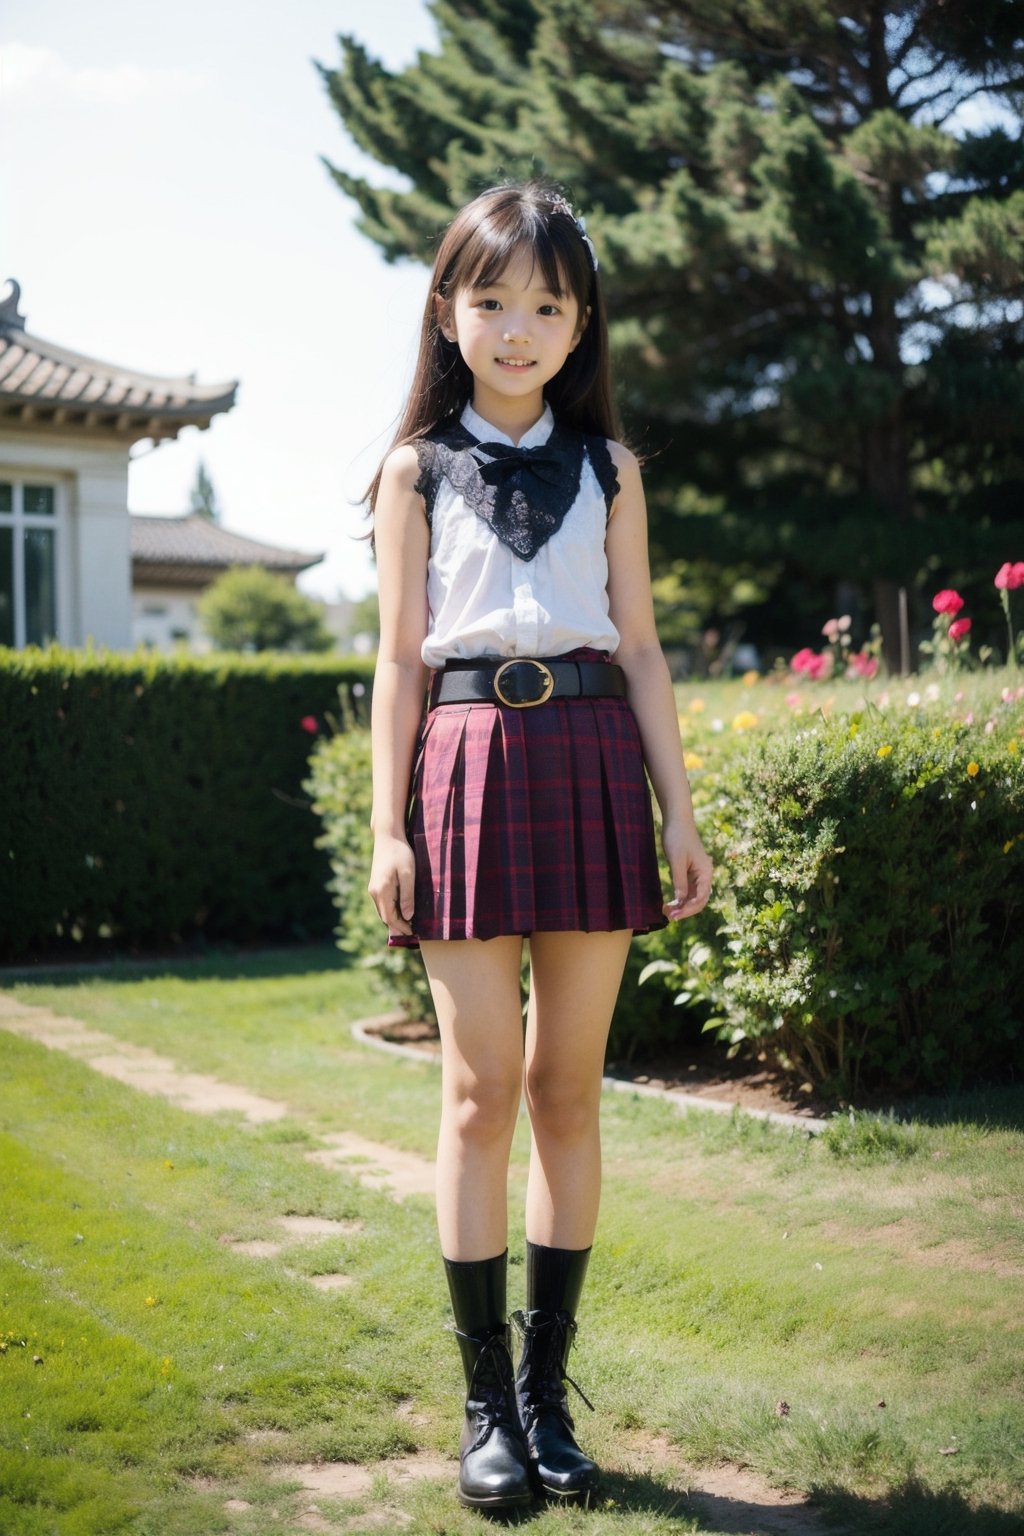 (((In the garden of a classical mansion villa))),(((looking at camera))),
人物：(((a elementary school little girl,korean elementary school little girl))),((Kim Taeyeon)),(((elementary school little girl body:1.3))),(the stature of a elementary school little girl),(((elementary school little girl))),
特質：(((The developing little girl's body:1.4))),Short stature, short legs, a child's body,the face of a child, the head of a child,
畫面：(((full body into shot))),
頭髮：(bangs),straight hair,Long hair:1.4,
服裝：(black lace, very oversized loose sleeveless sheer vest),(red mini pleated skirt), (patterned pleated skirt), ((belt)),black leather boots,